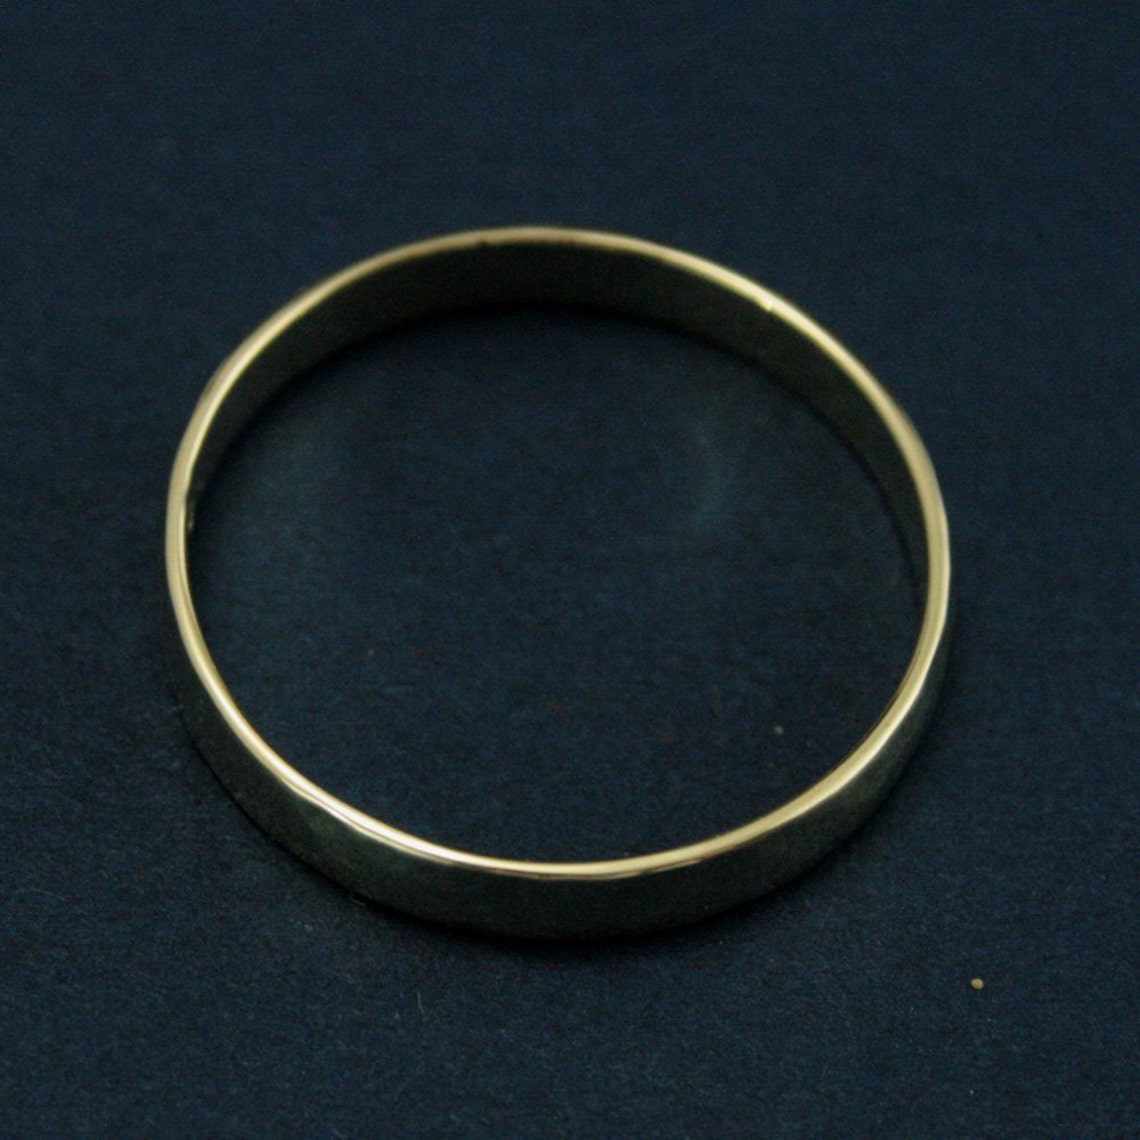 Hammered Gold Wedding Band4mm Wide Perfect Hammered - Etsy